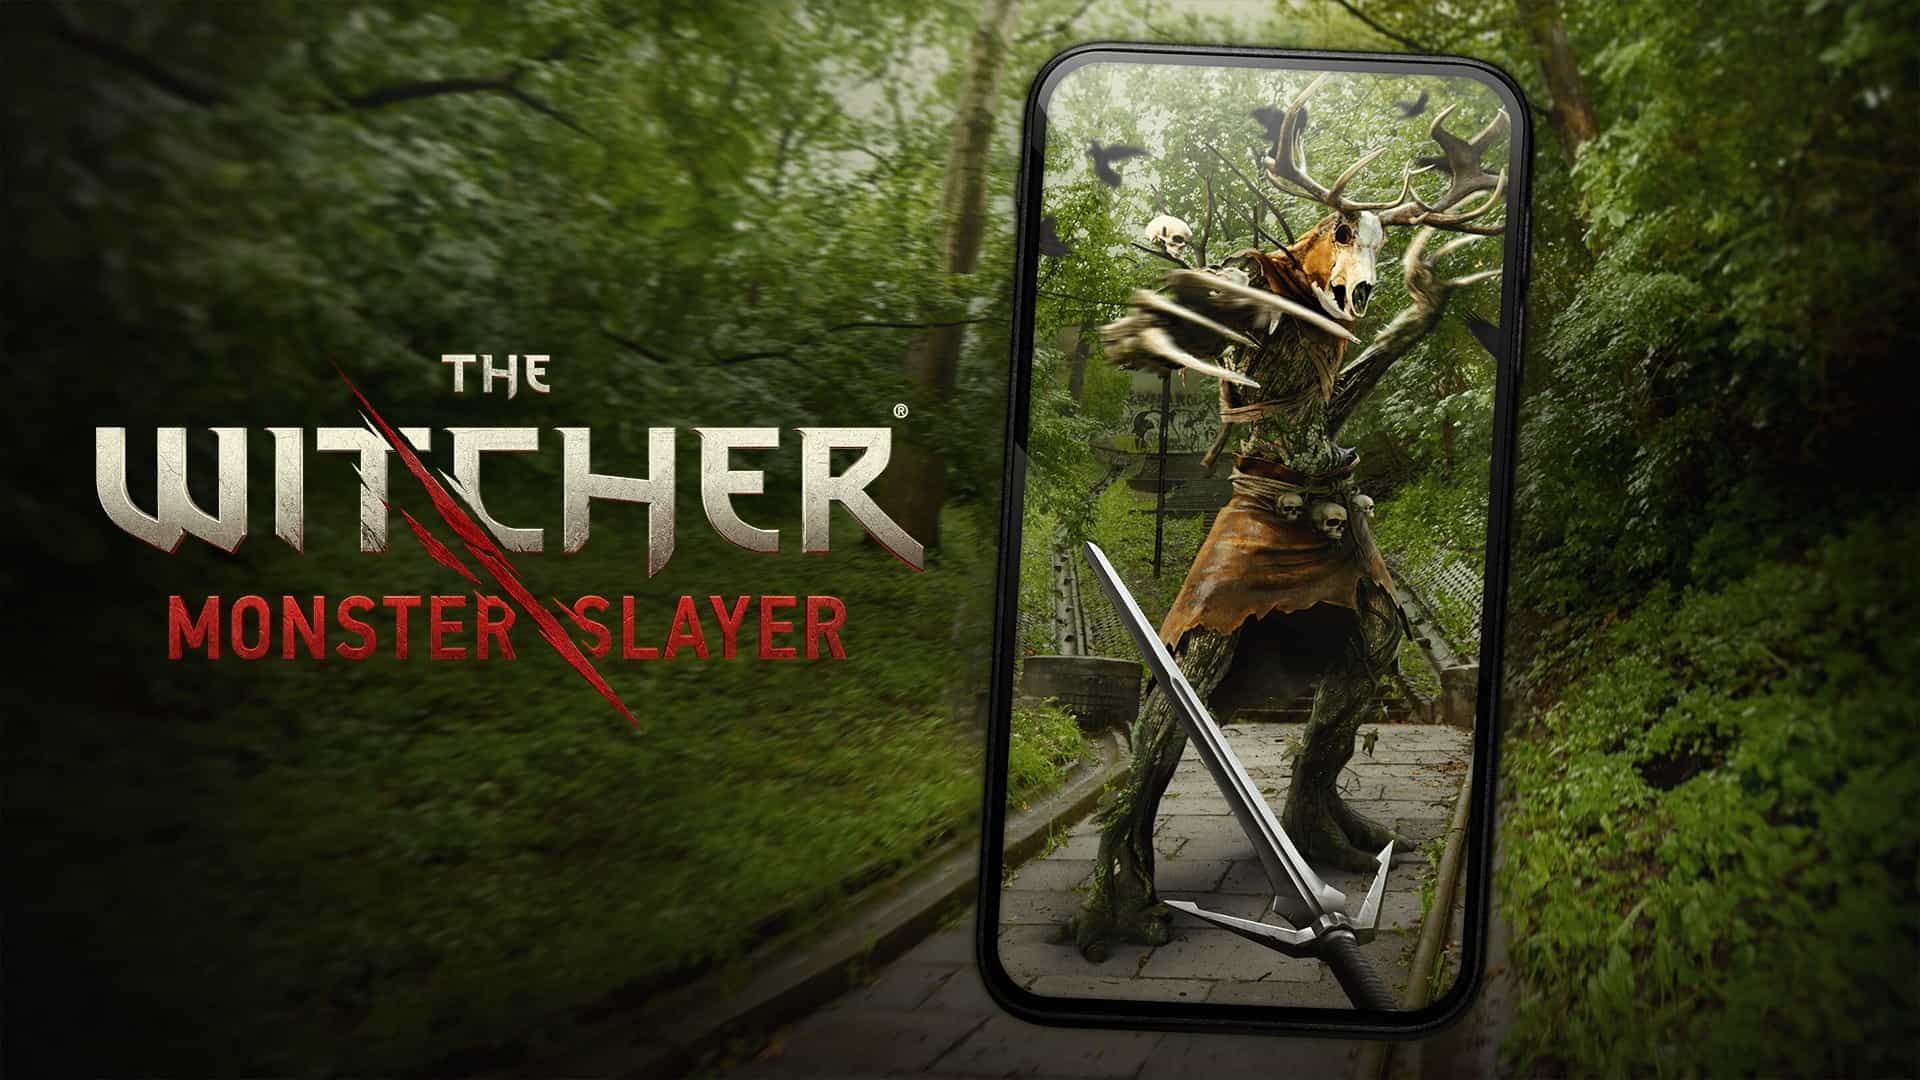 The Witcher: Monster Slayer خارج لأجهزة Android و iOS